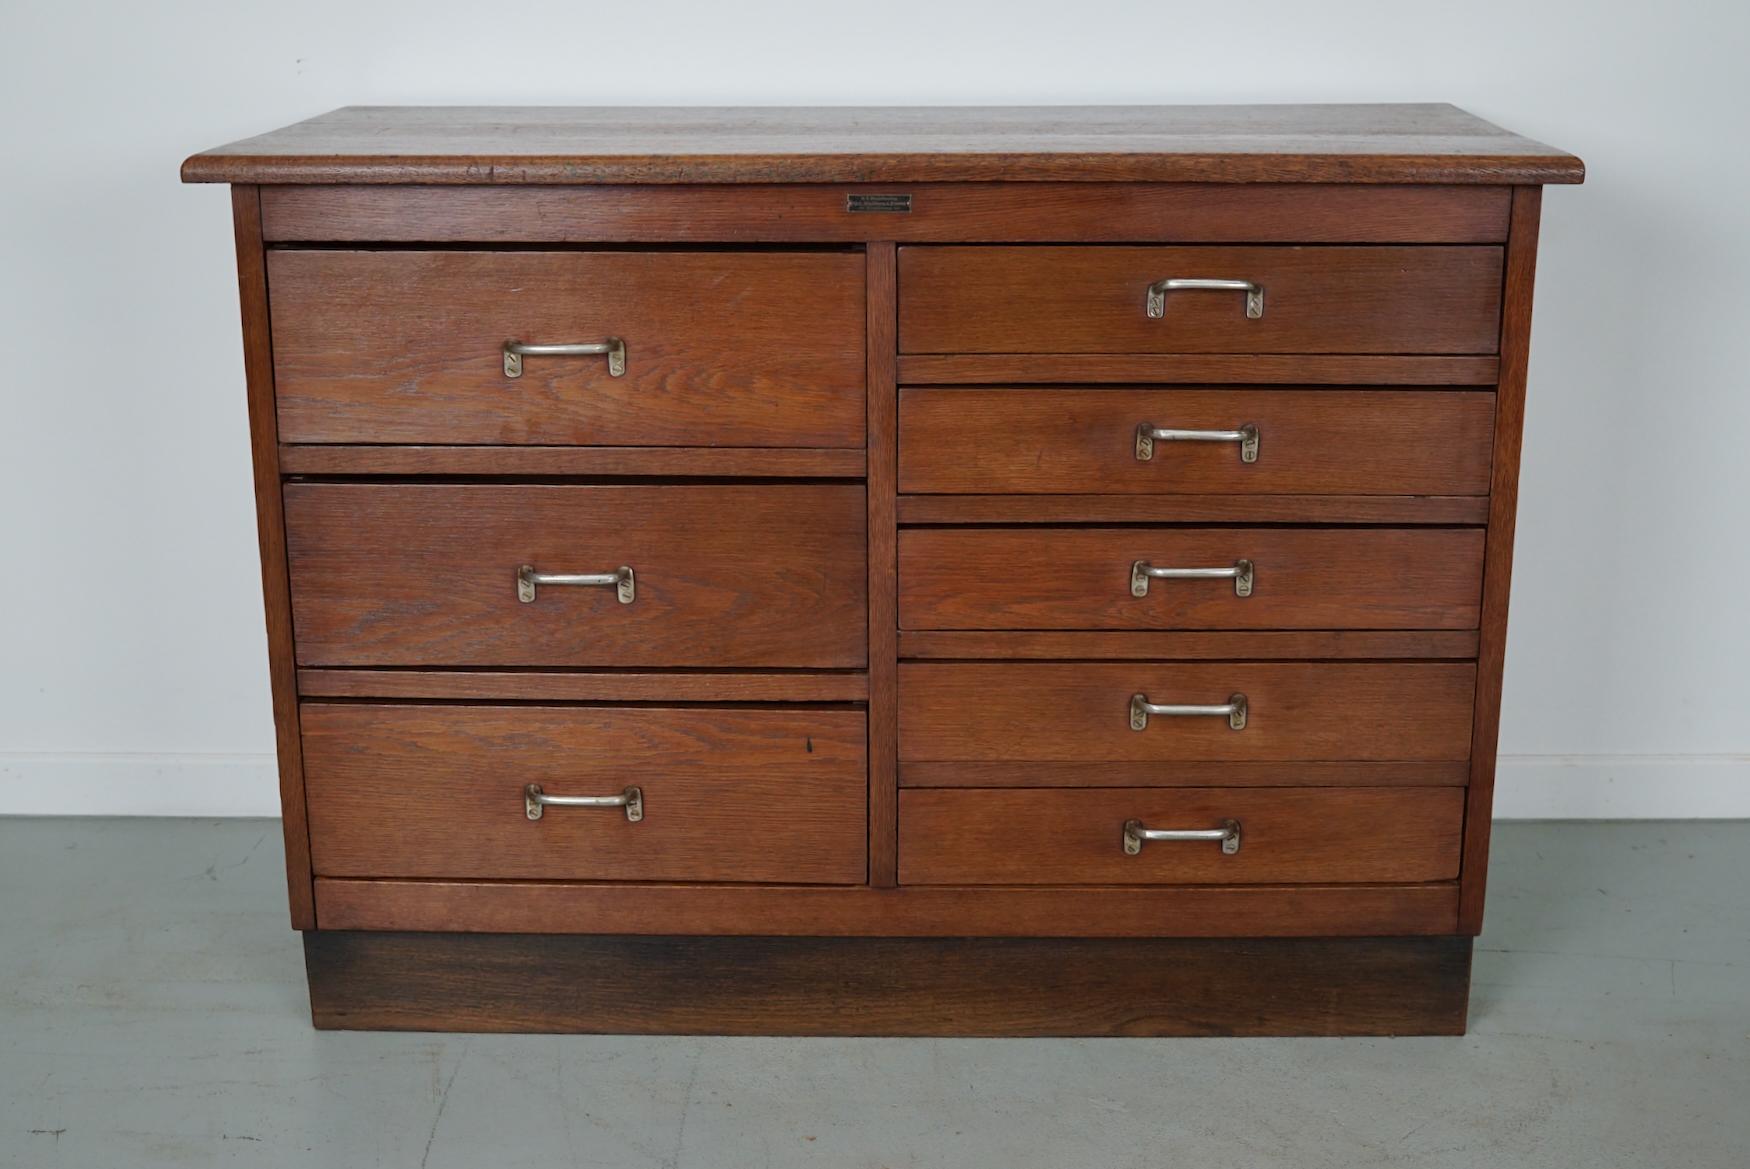 Dutch Industrial Oak Apothecary Cabinet, Mid-20th Century For Sale 14